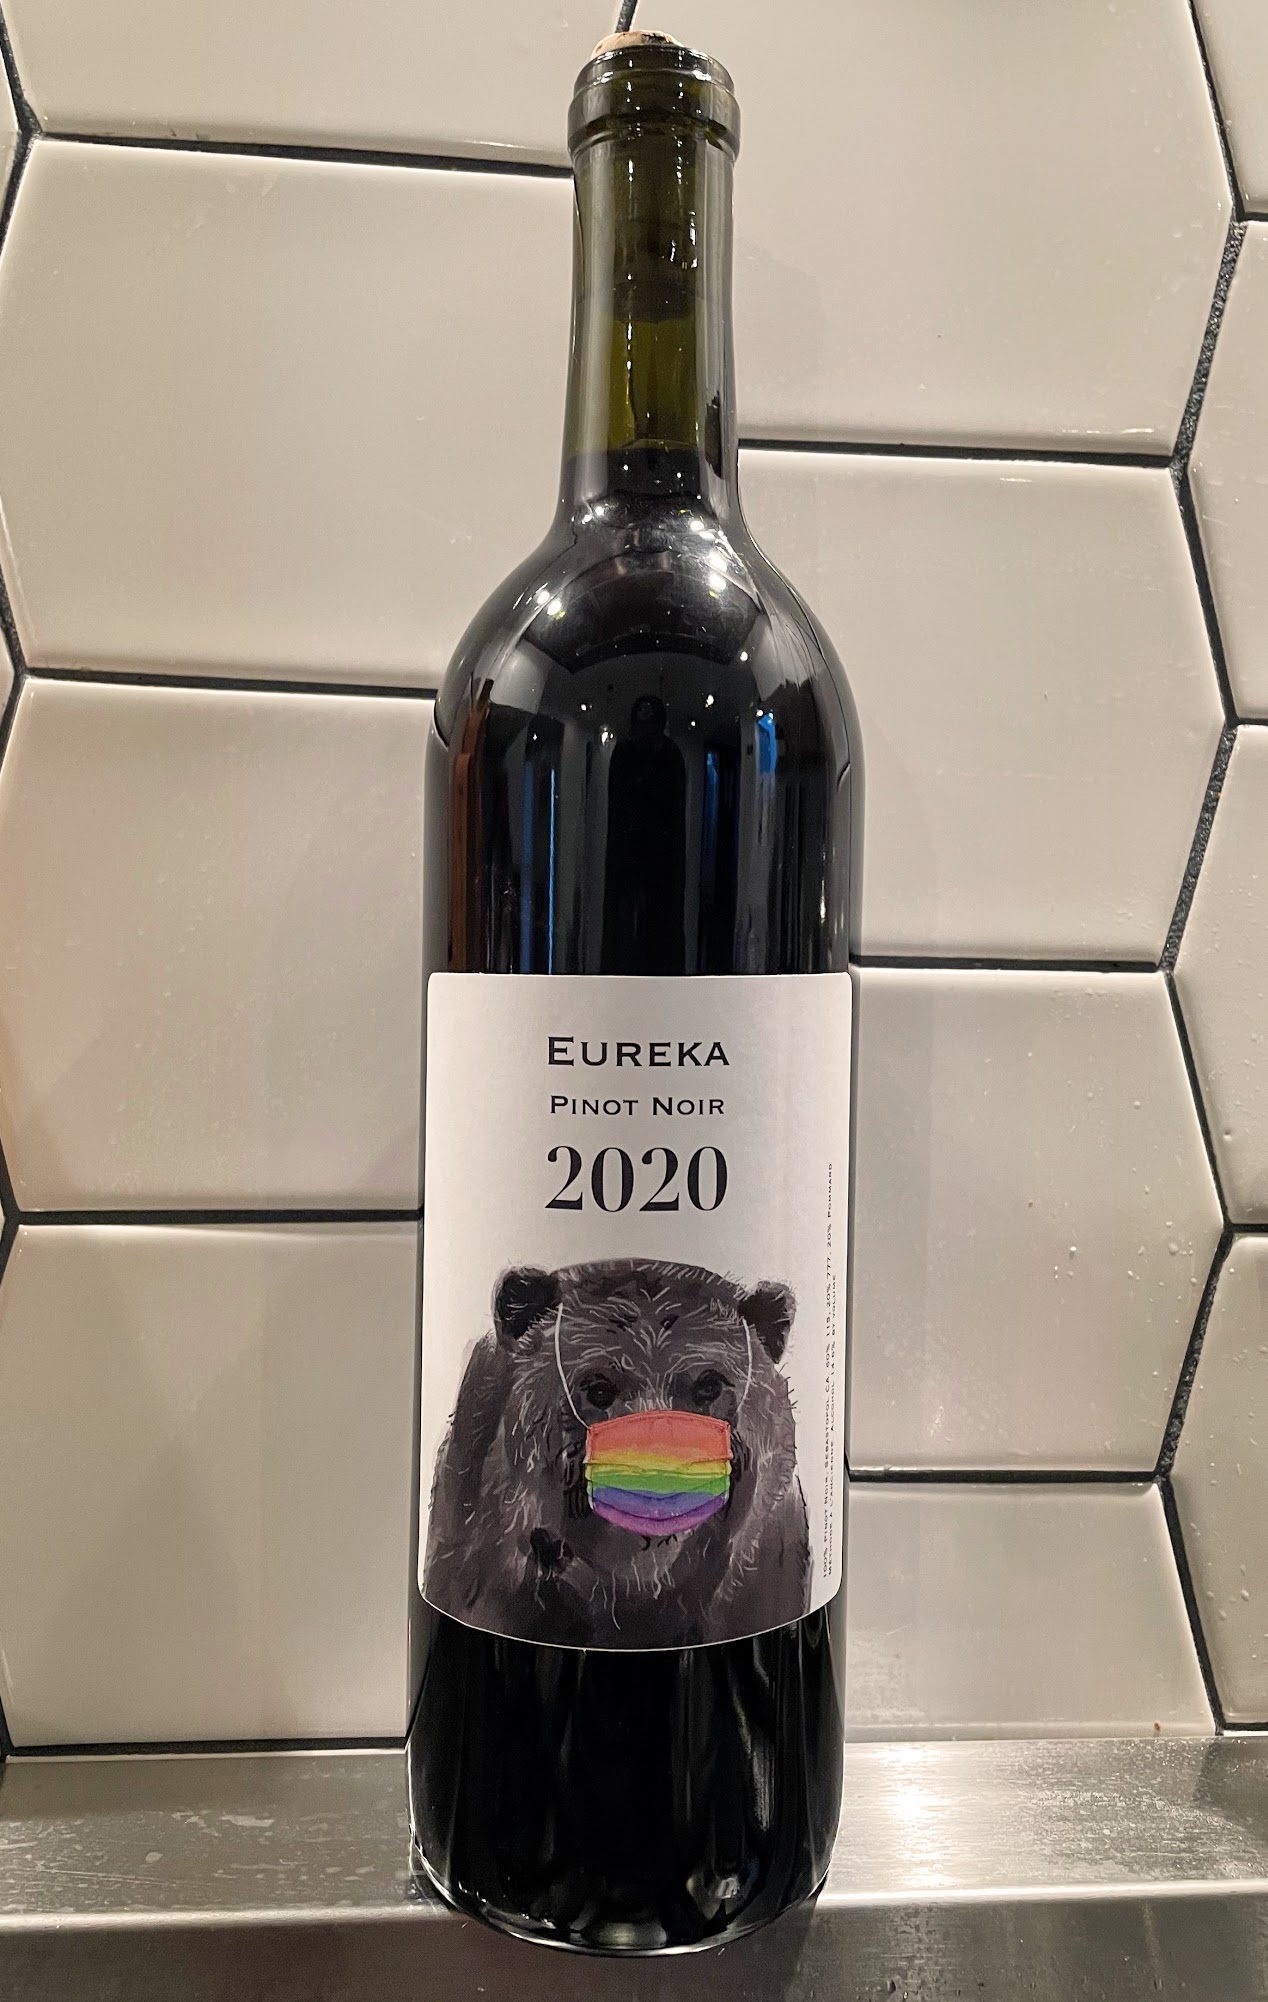 2020 Pinot bottle with label.